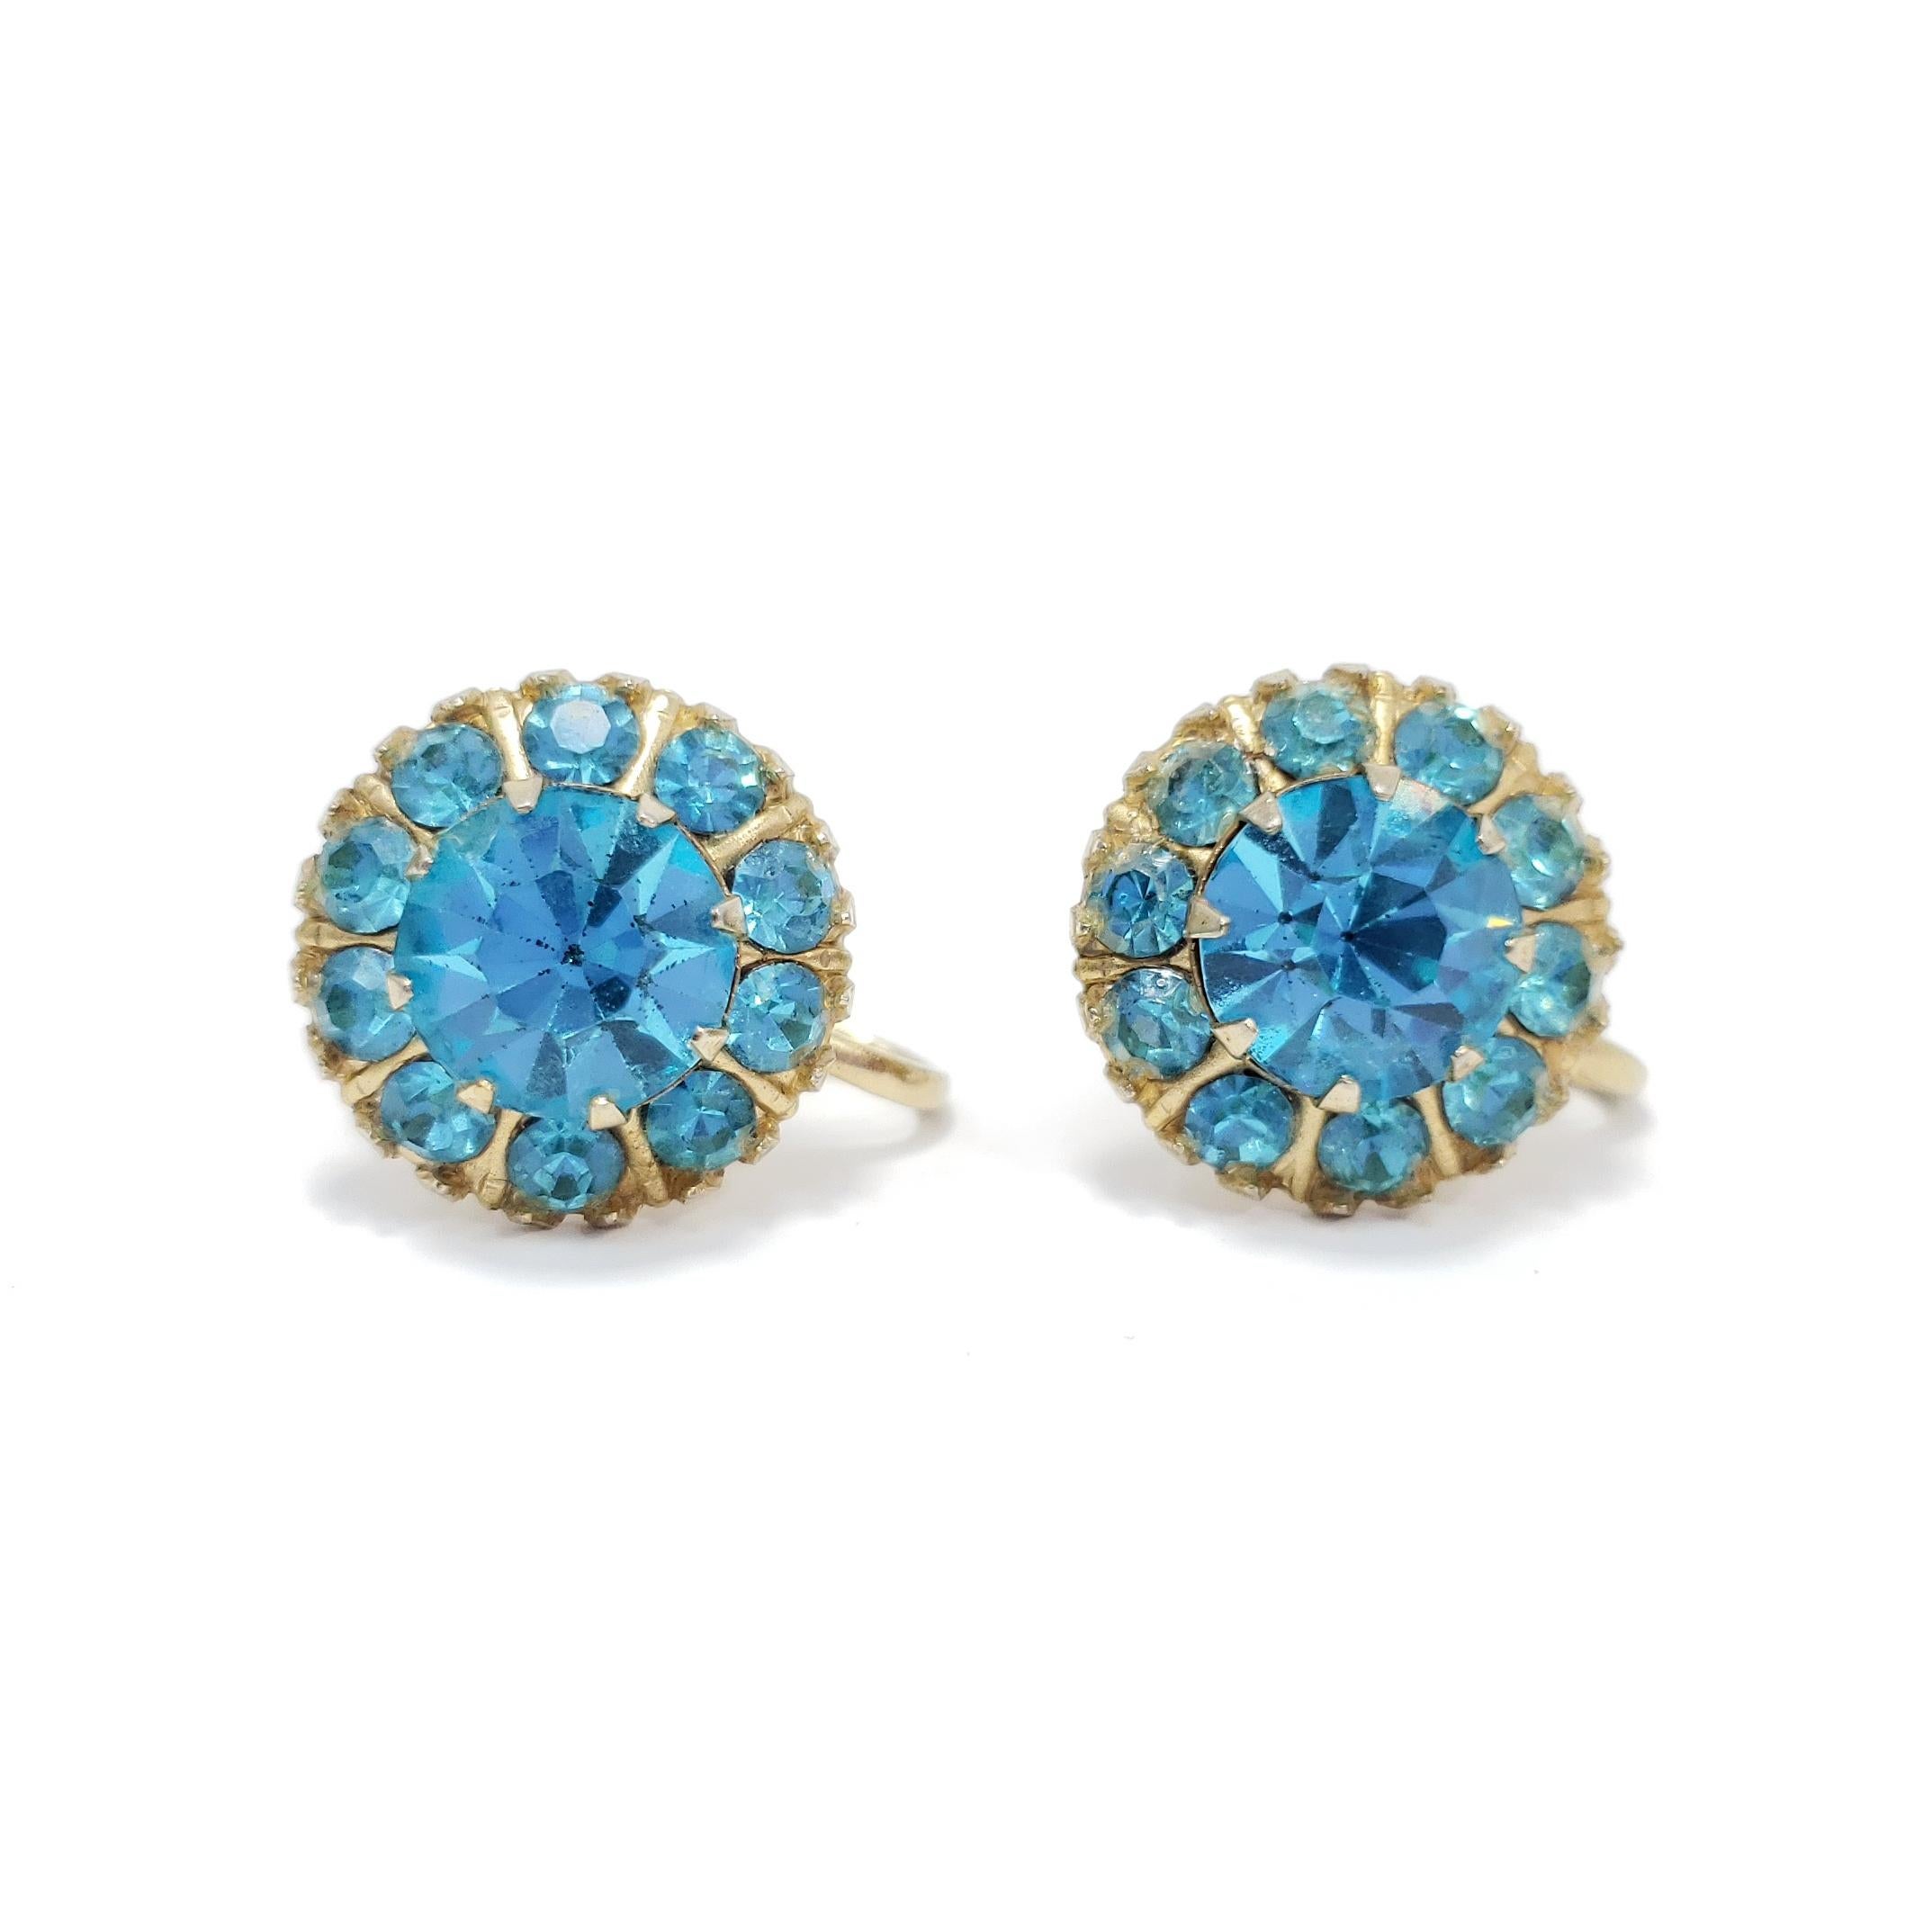 A touch of retro flair! These golden earrings are decorated with sparkling turquoise crystals.

Screw back closure. Circa mid 1900s.

Gold-plated.